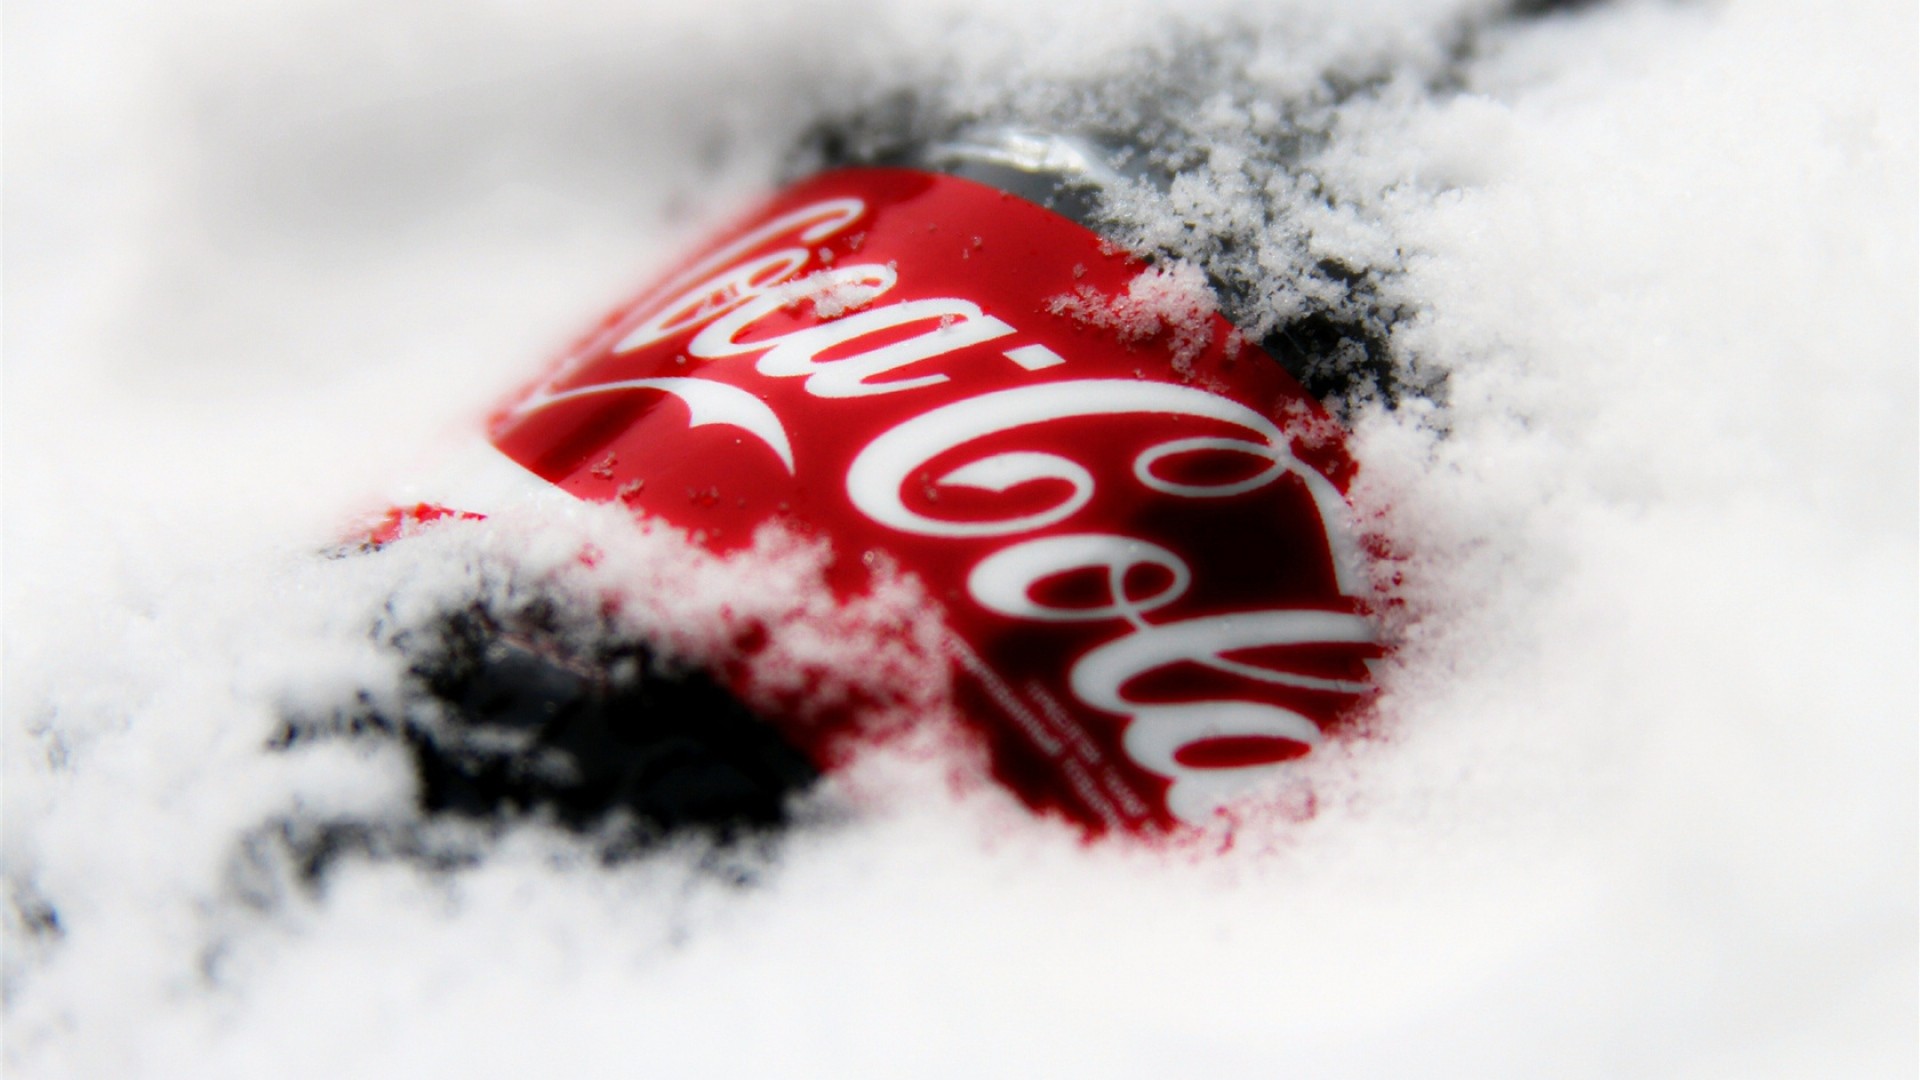 1920x1080 Marvelous Coca Cola Screensaver 70 HD Wallpapers And Backgrounds .